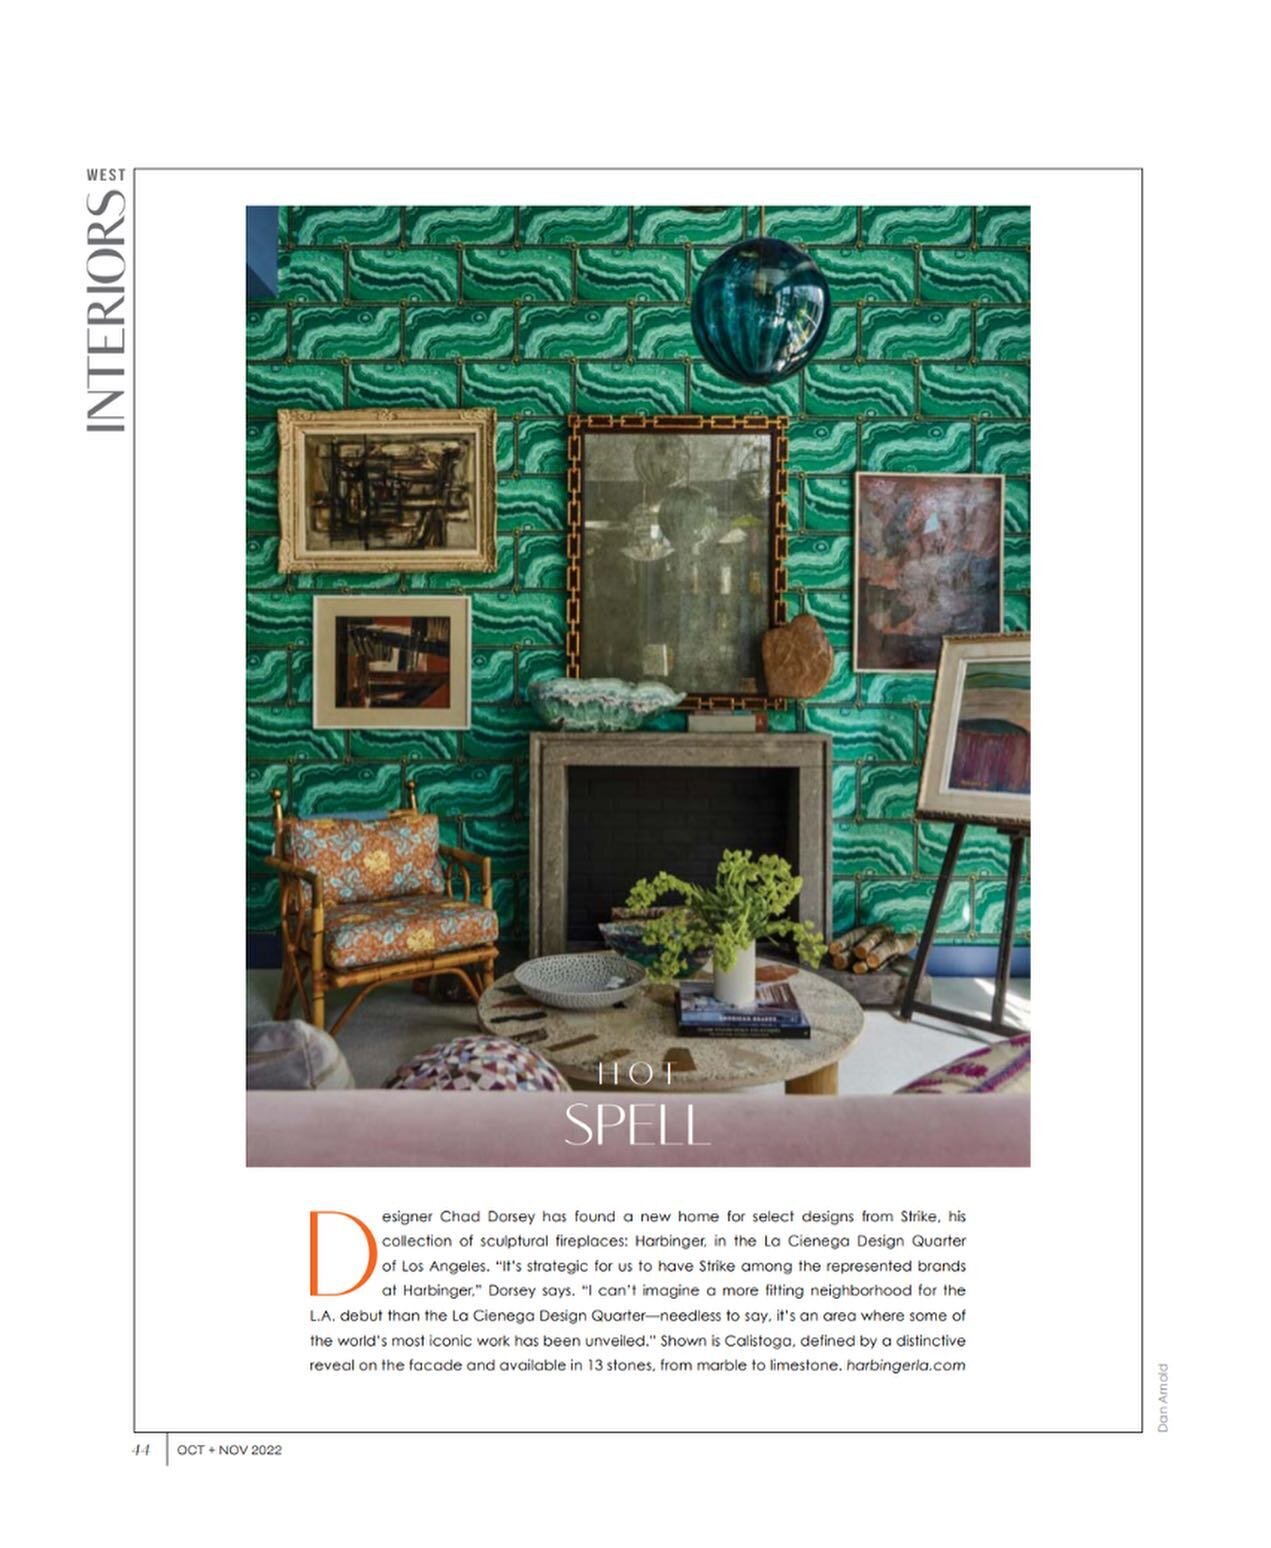 Hot Spell. Designed by @chadcalebdorsey with a distinctive reveal on the facade, the Calistoga @___s_t_r_i_k_e___ fireplace has found a new home at Harbinger Los Angeles in the La Cienega Design Quarter. Interiors magazine features the bespoke mantle